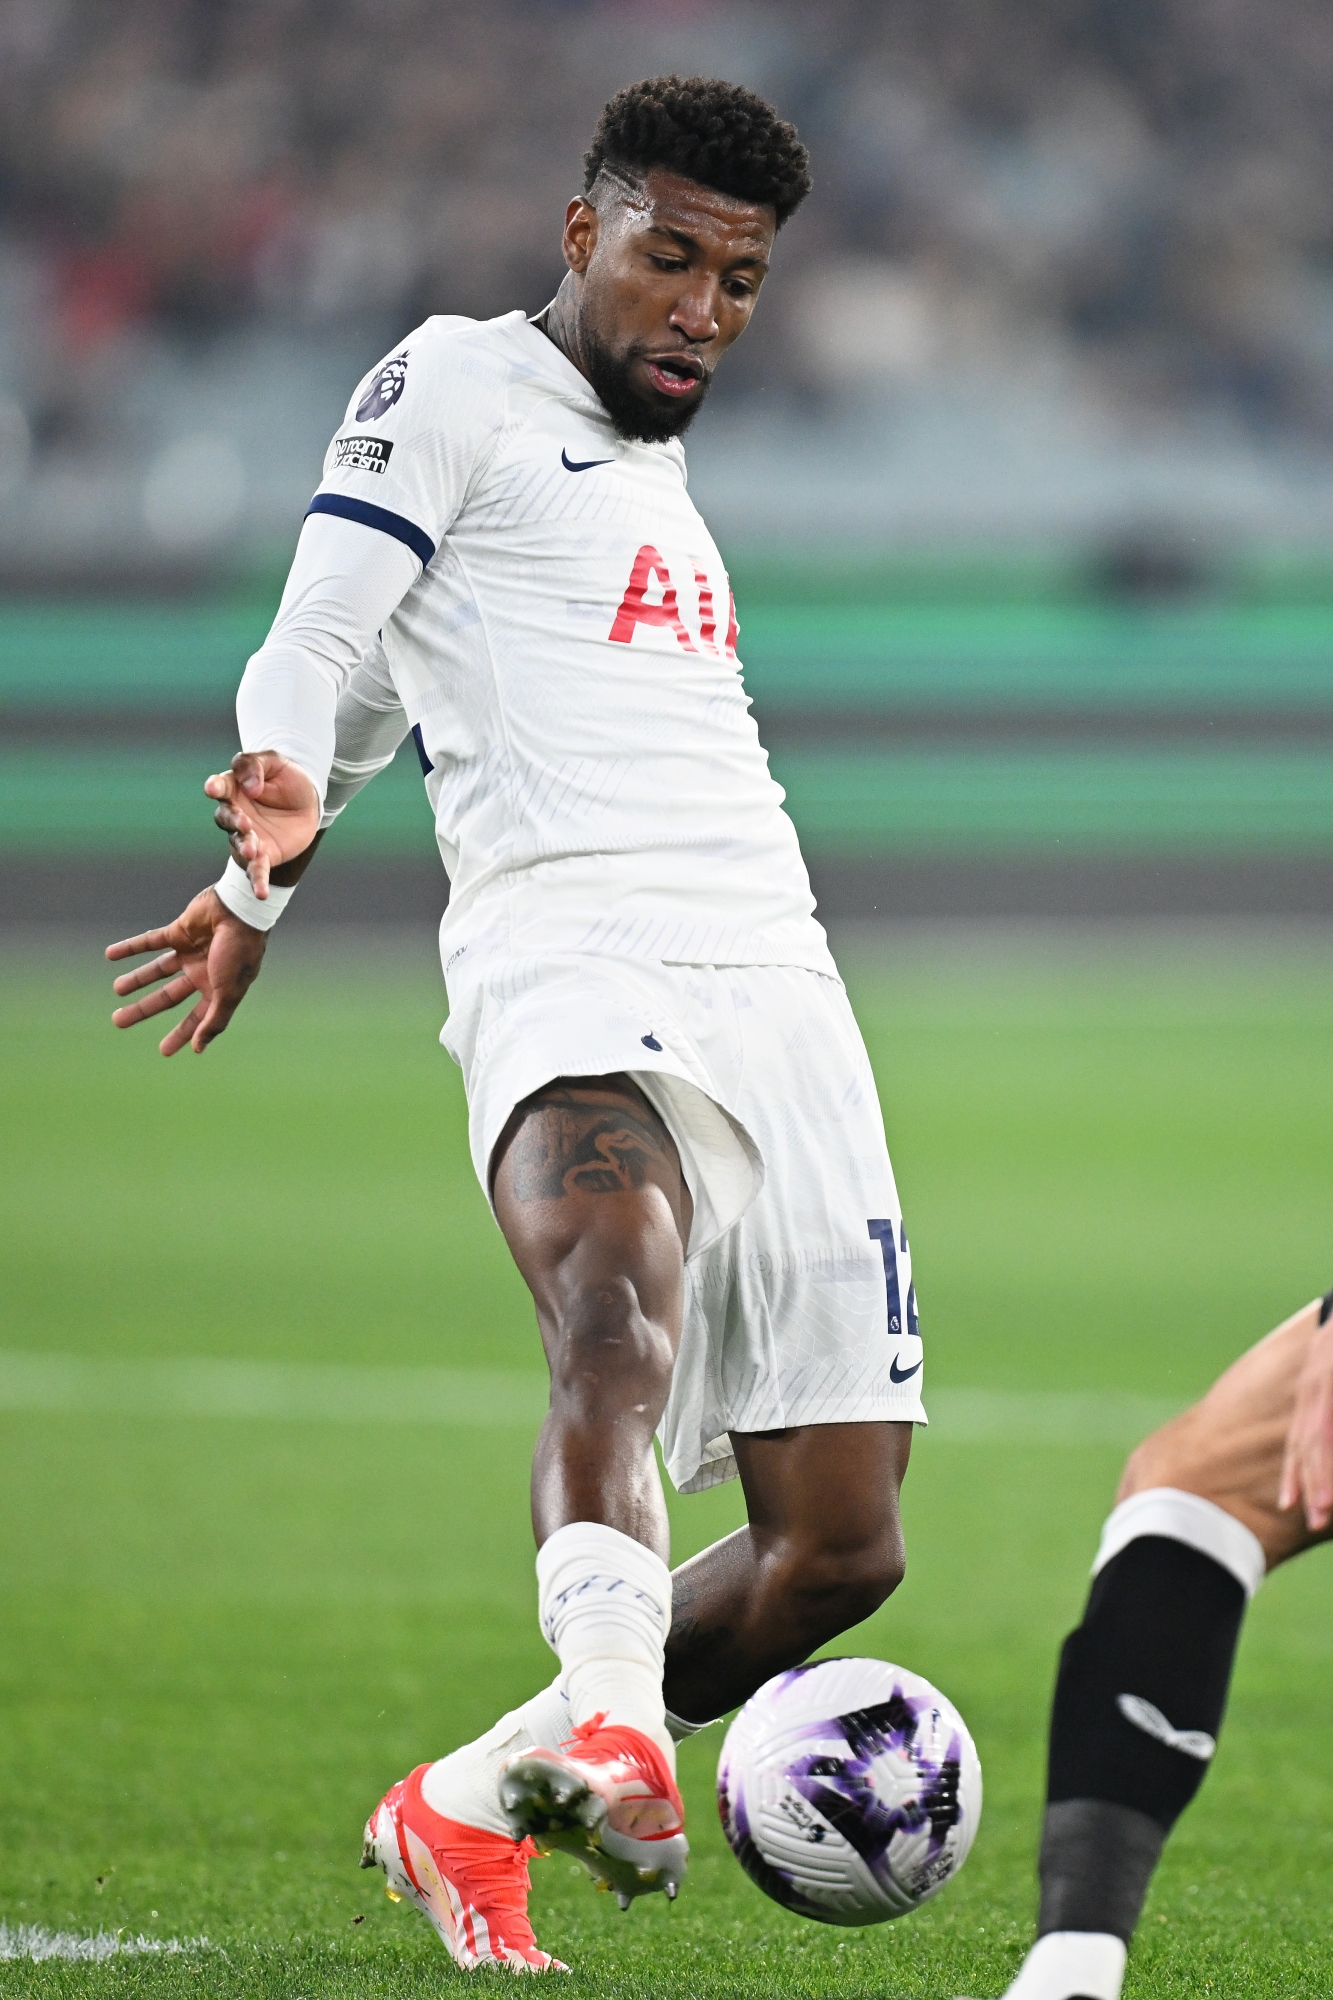 MELBOURNE, AUSTRALIA - MAY 22: Emerson Royal of Tottenham Hotspur in action during the exhibition match between Tottenham Hotspur FC and Newcastle United FC at Melbourne Cricket Ground on May 22, 2024 in Melbourne, Australia. (Photo by Daniel Pockett/Getty Images)